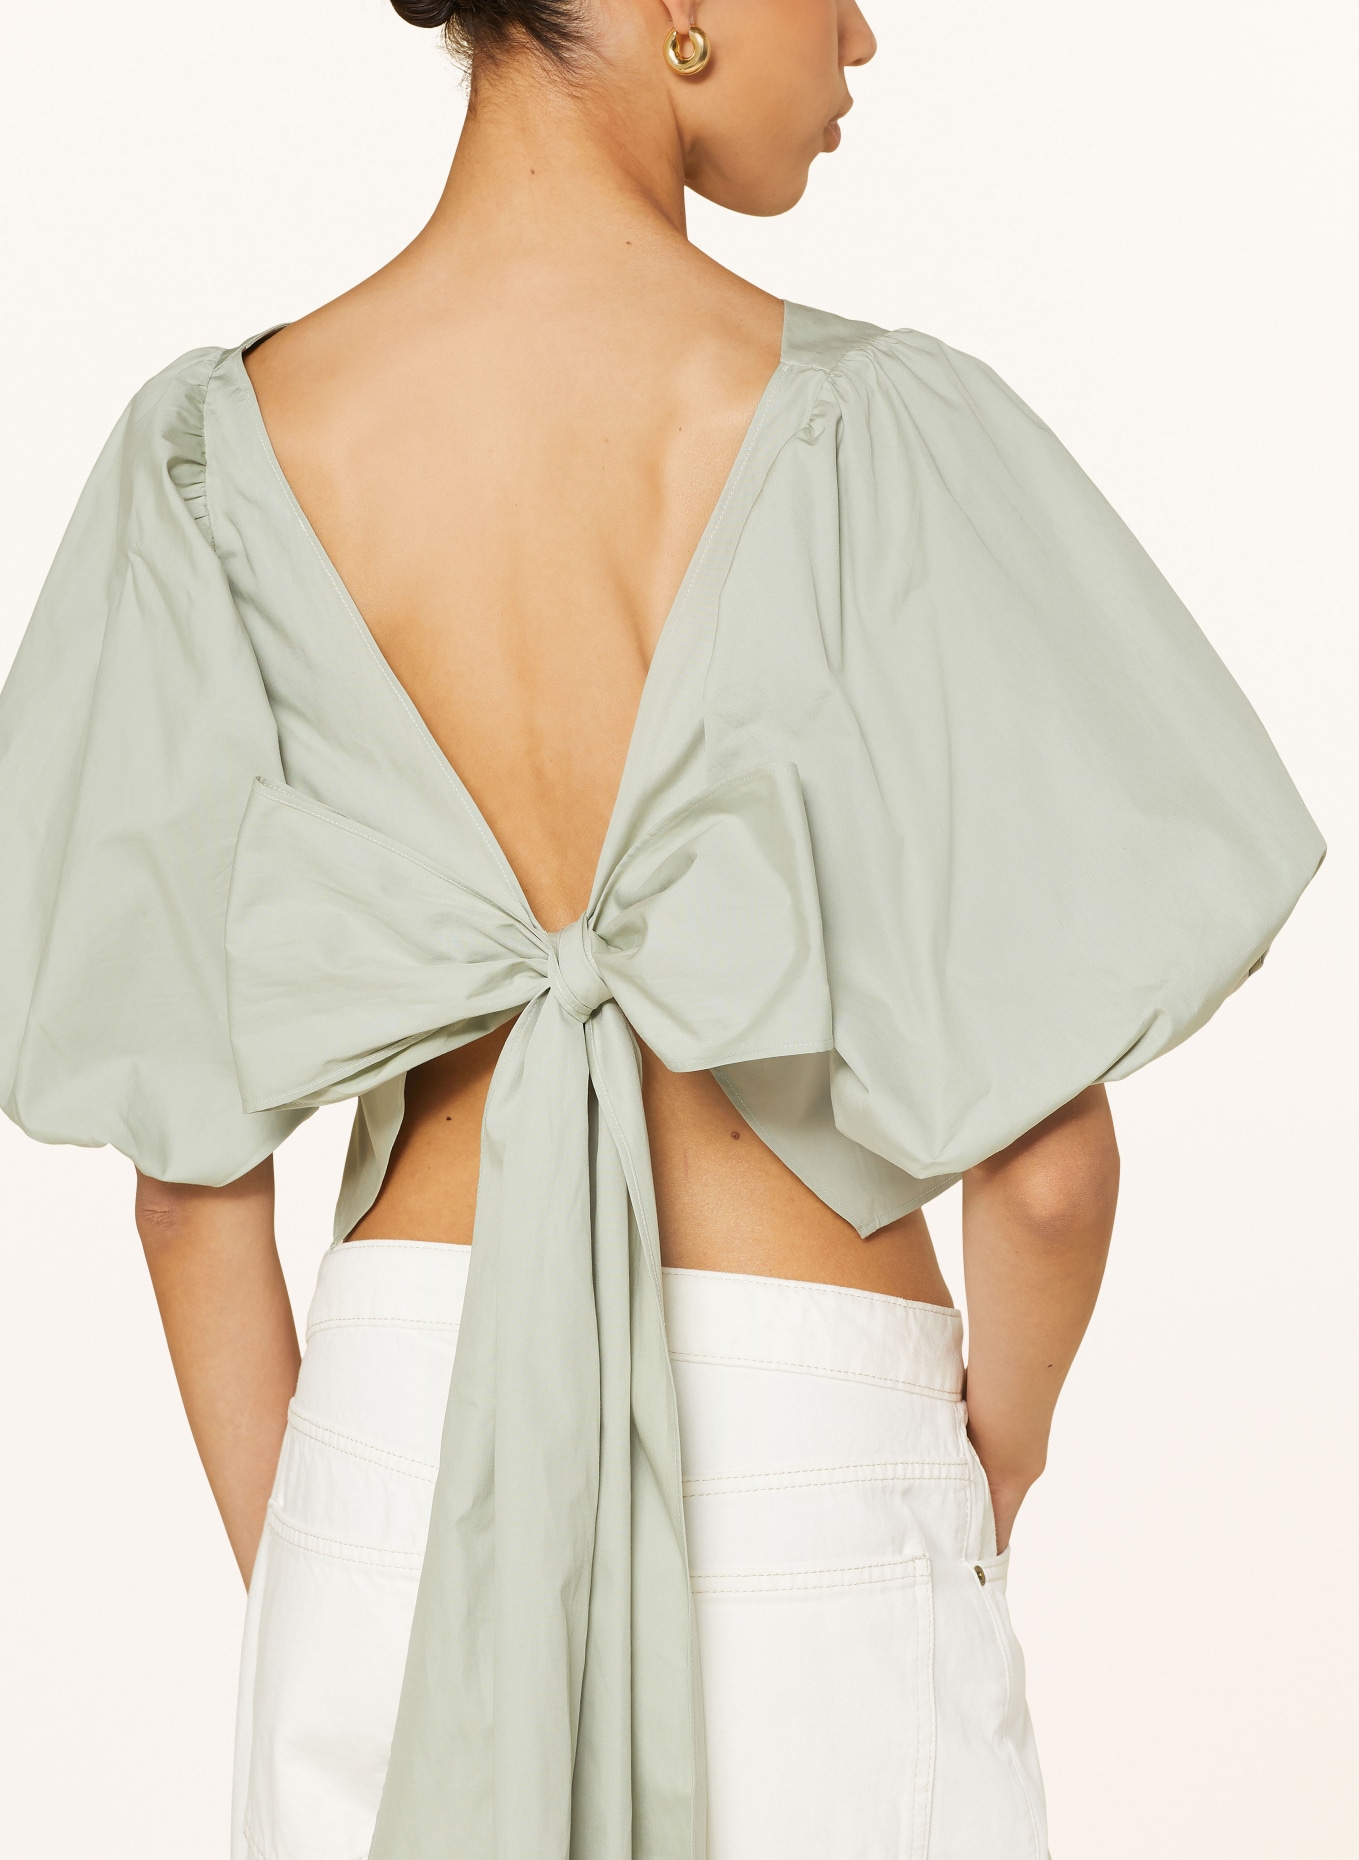 by Aylin Koenig Cropped shirt blouse, Color: MINT (Image 4)